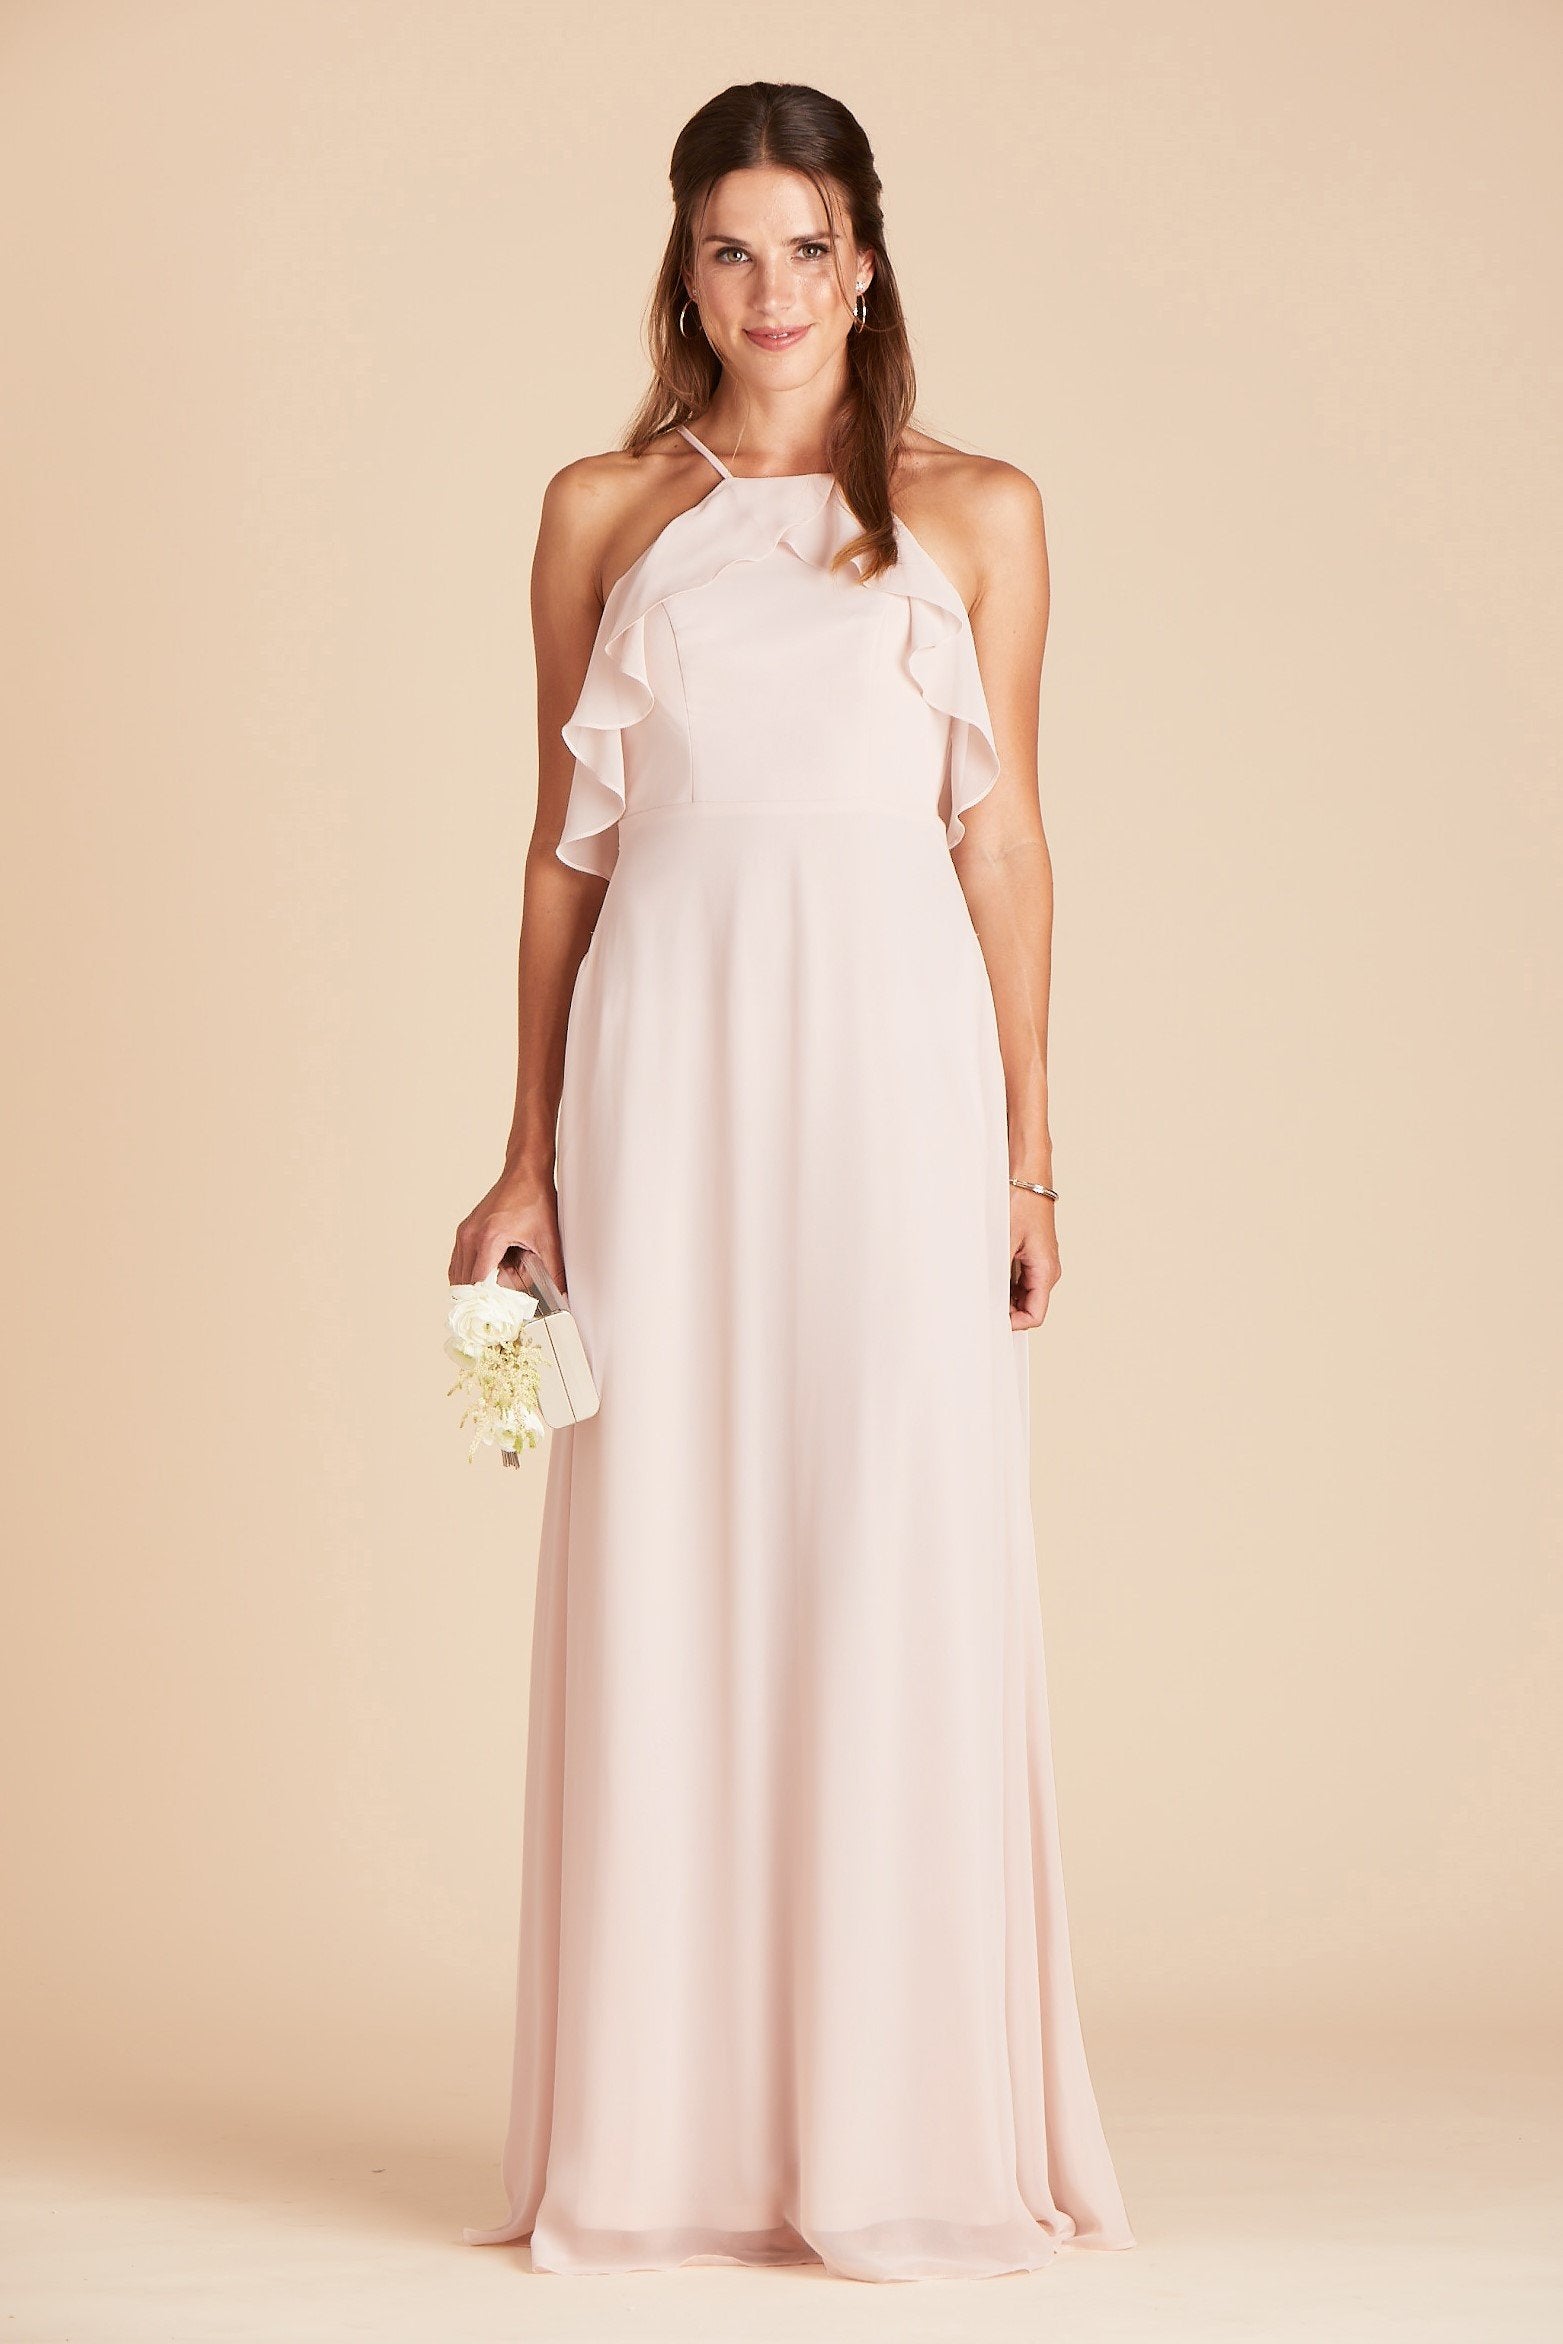 Jules bridesmaid dress in pale blush chiffon by Birdy Grey, front view